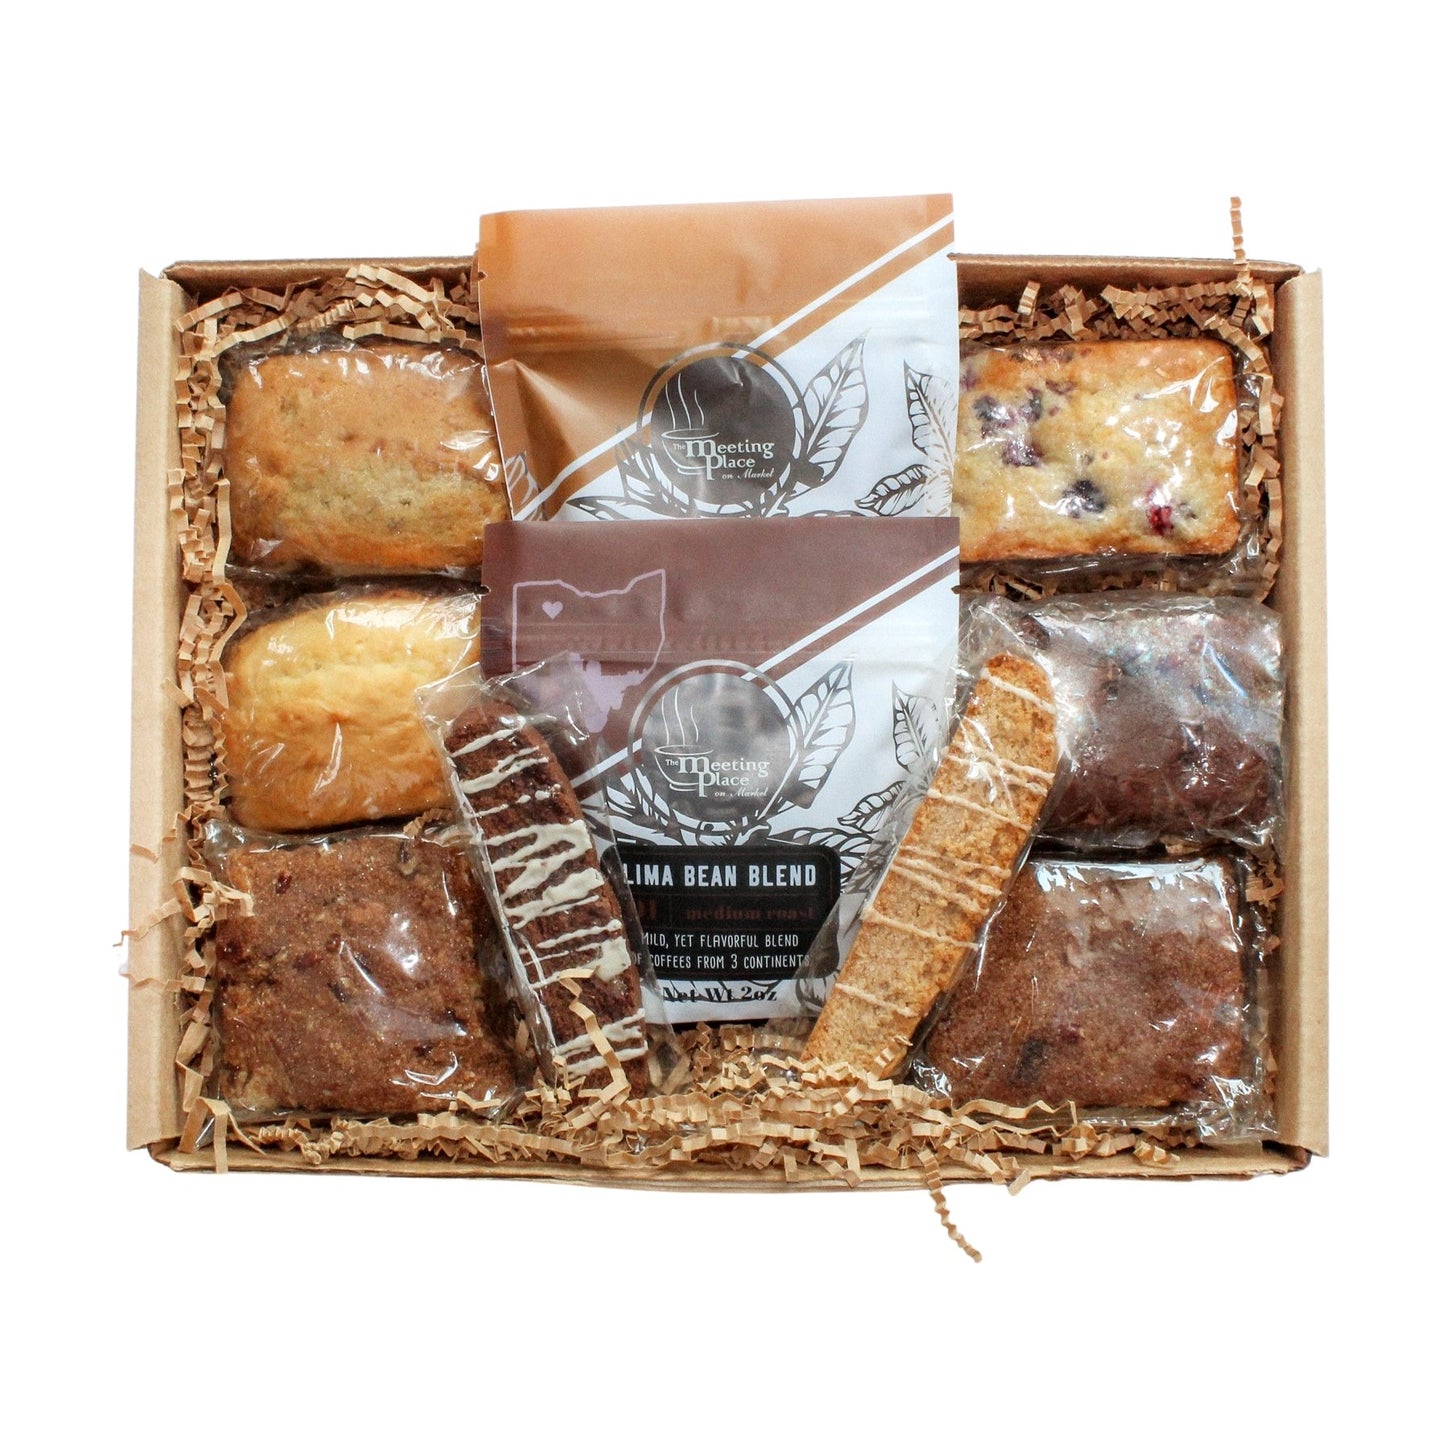 Mother's Day Breakfast Gift Basket with Flavored Coffee Mother's Day Gift Basket - The Meeting Place on Market